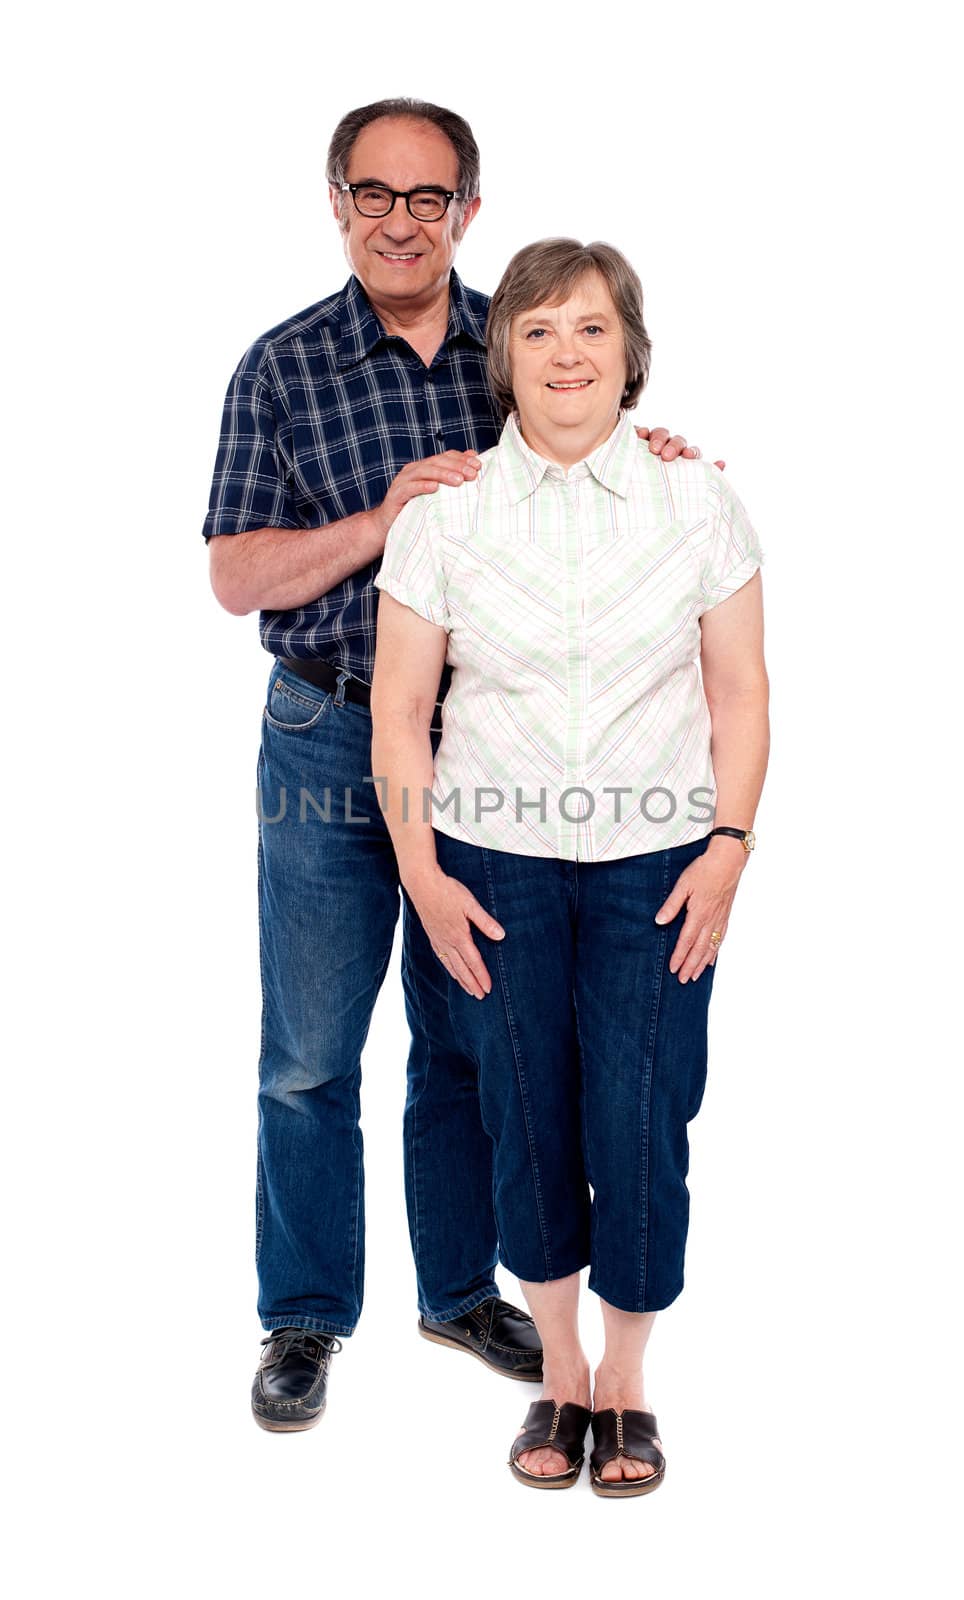 Full length portrait of attractive aged couple isolated over white background